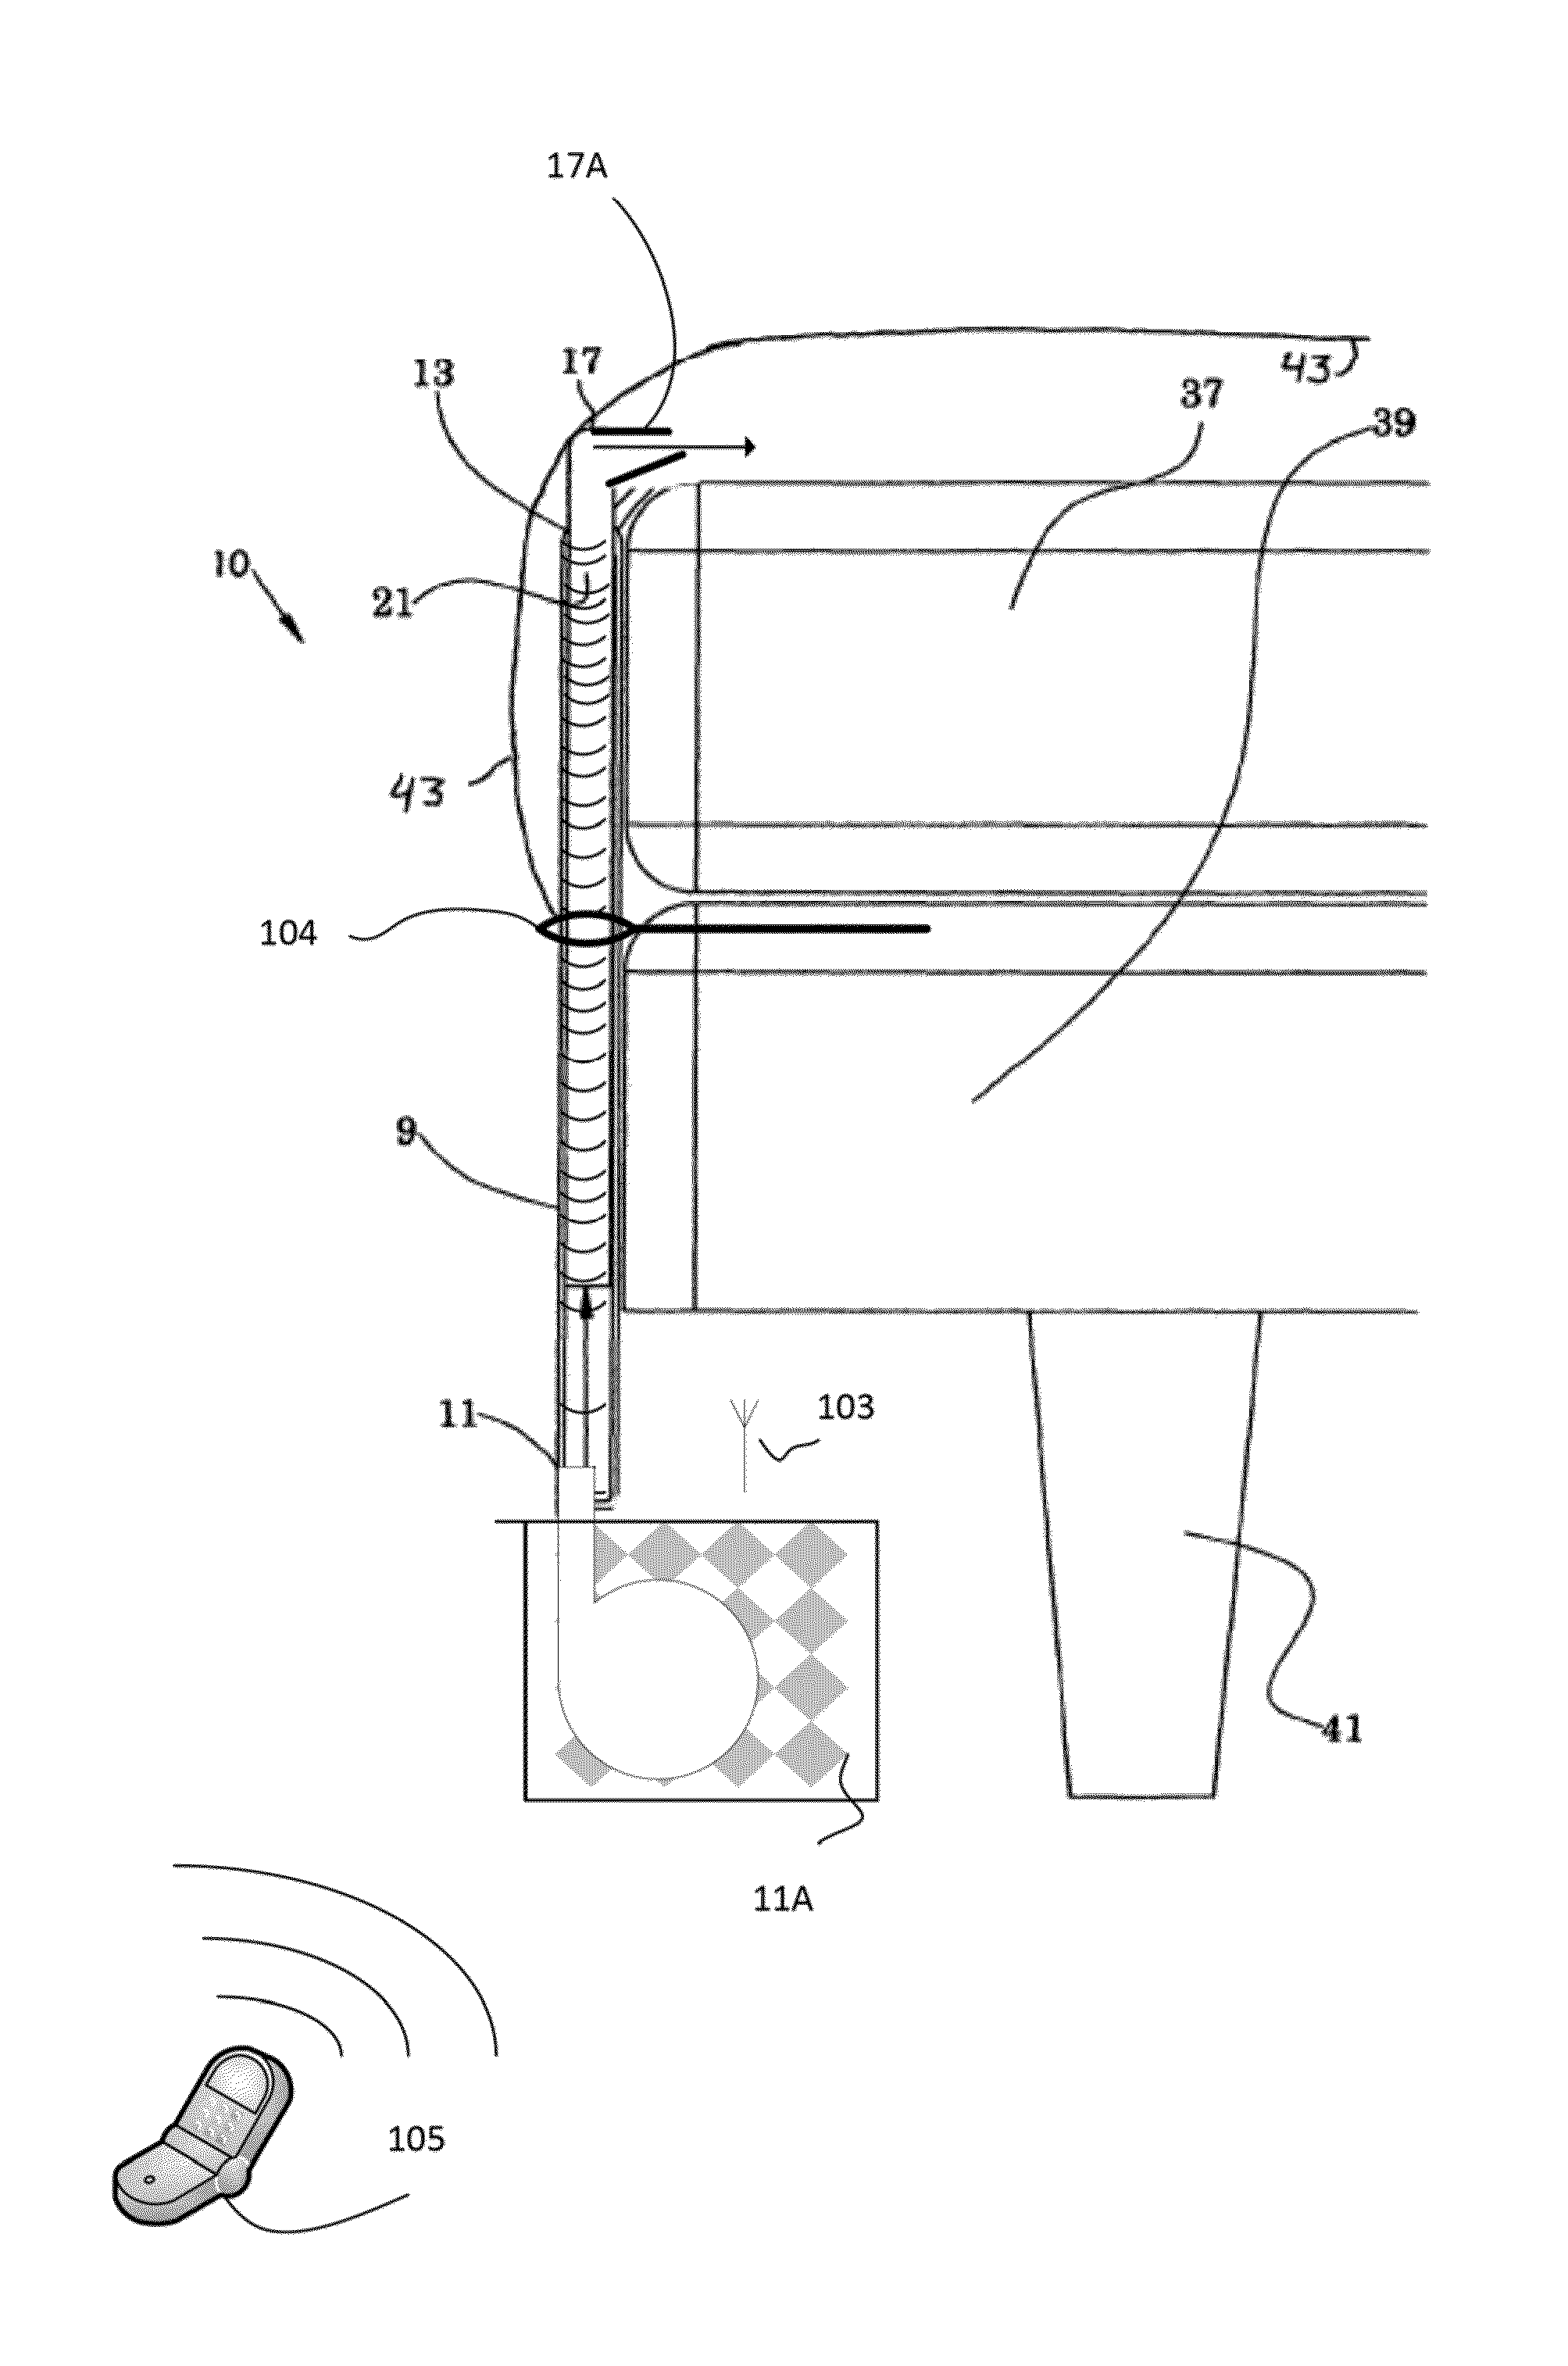 Forced Air Apparatus for Conditioning a Volume of Air